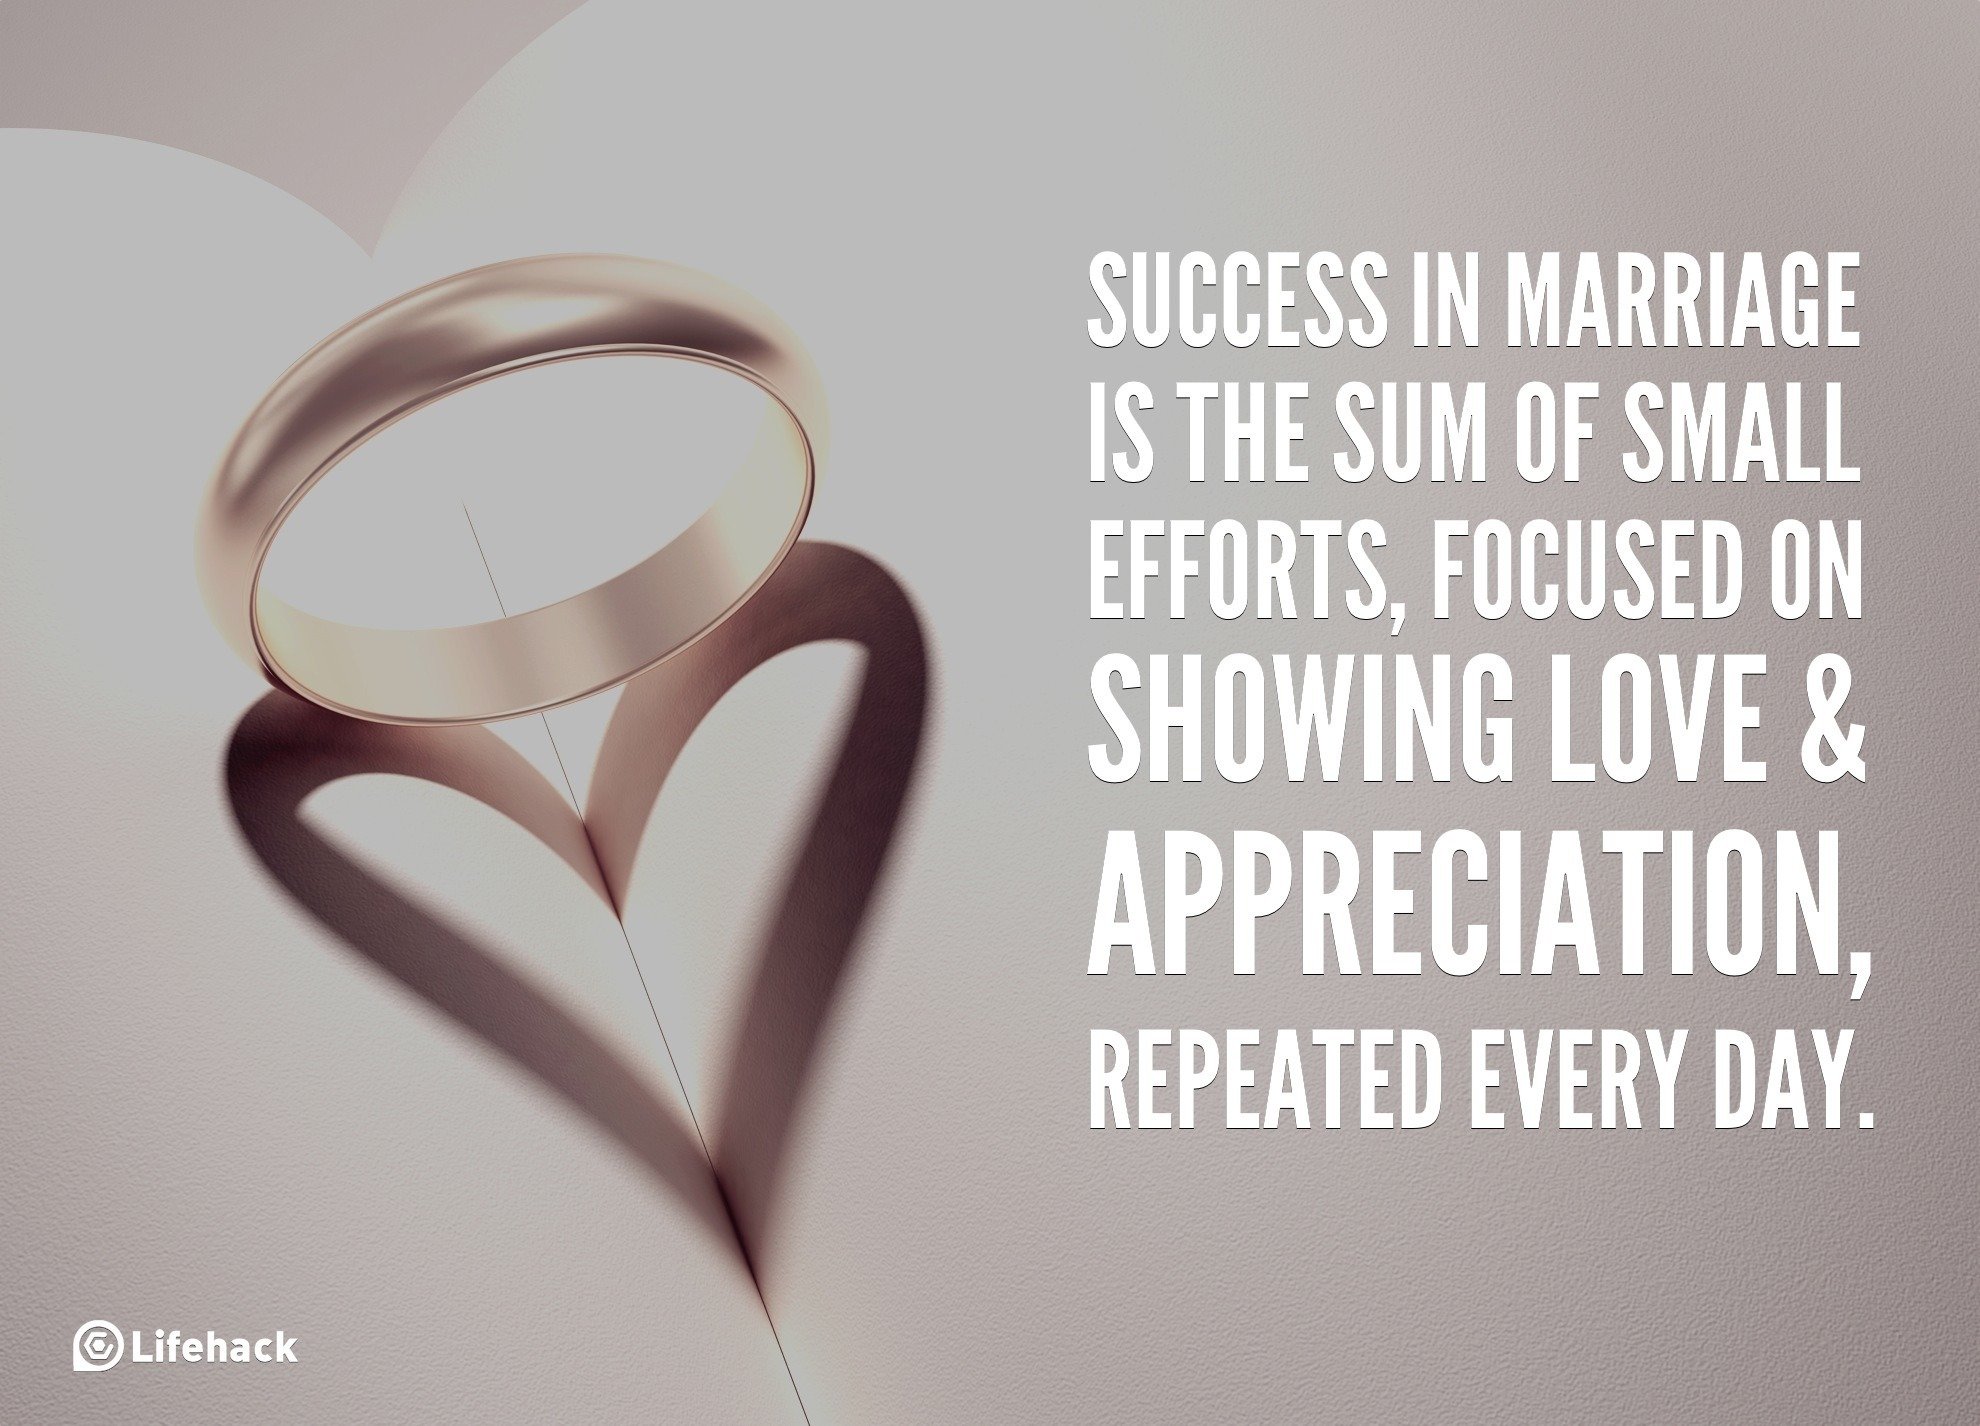 30sec Tip: How to Build a Long Lasting Marriage